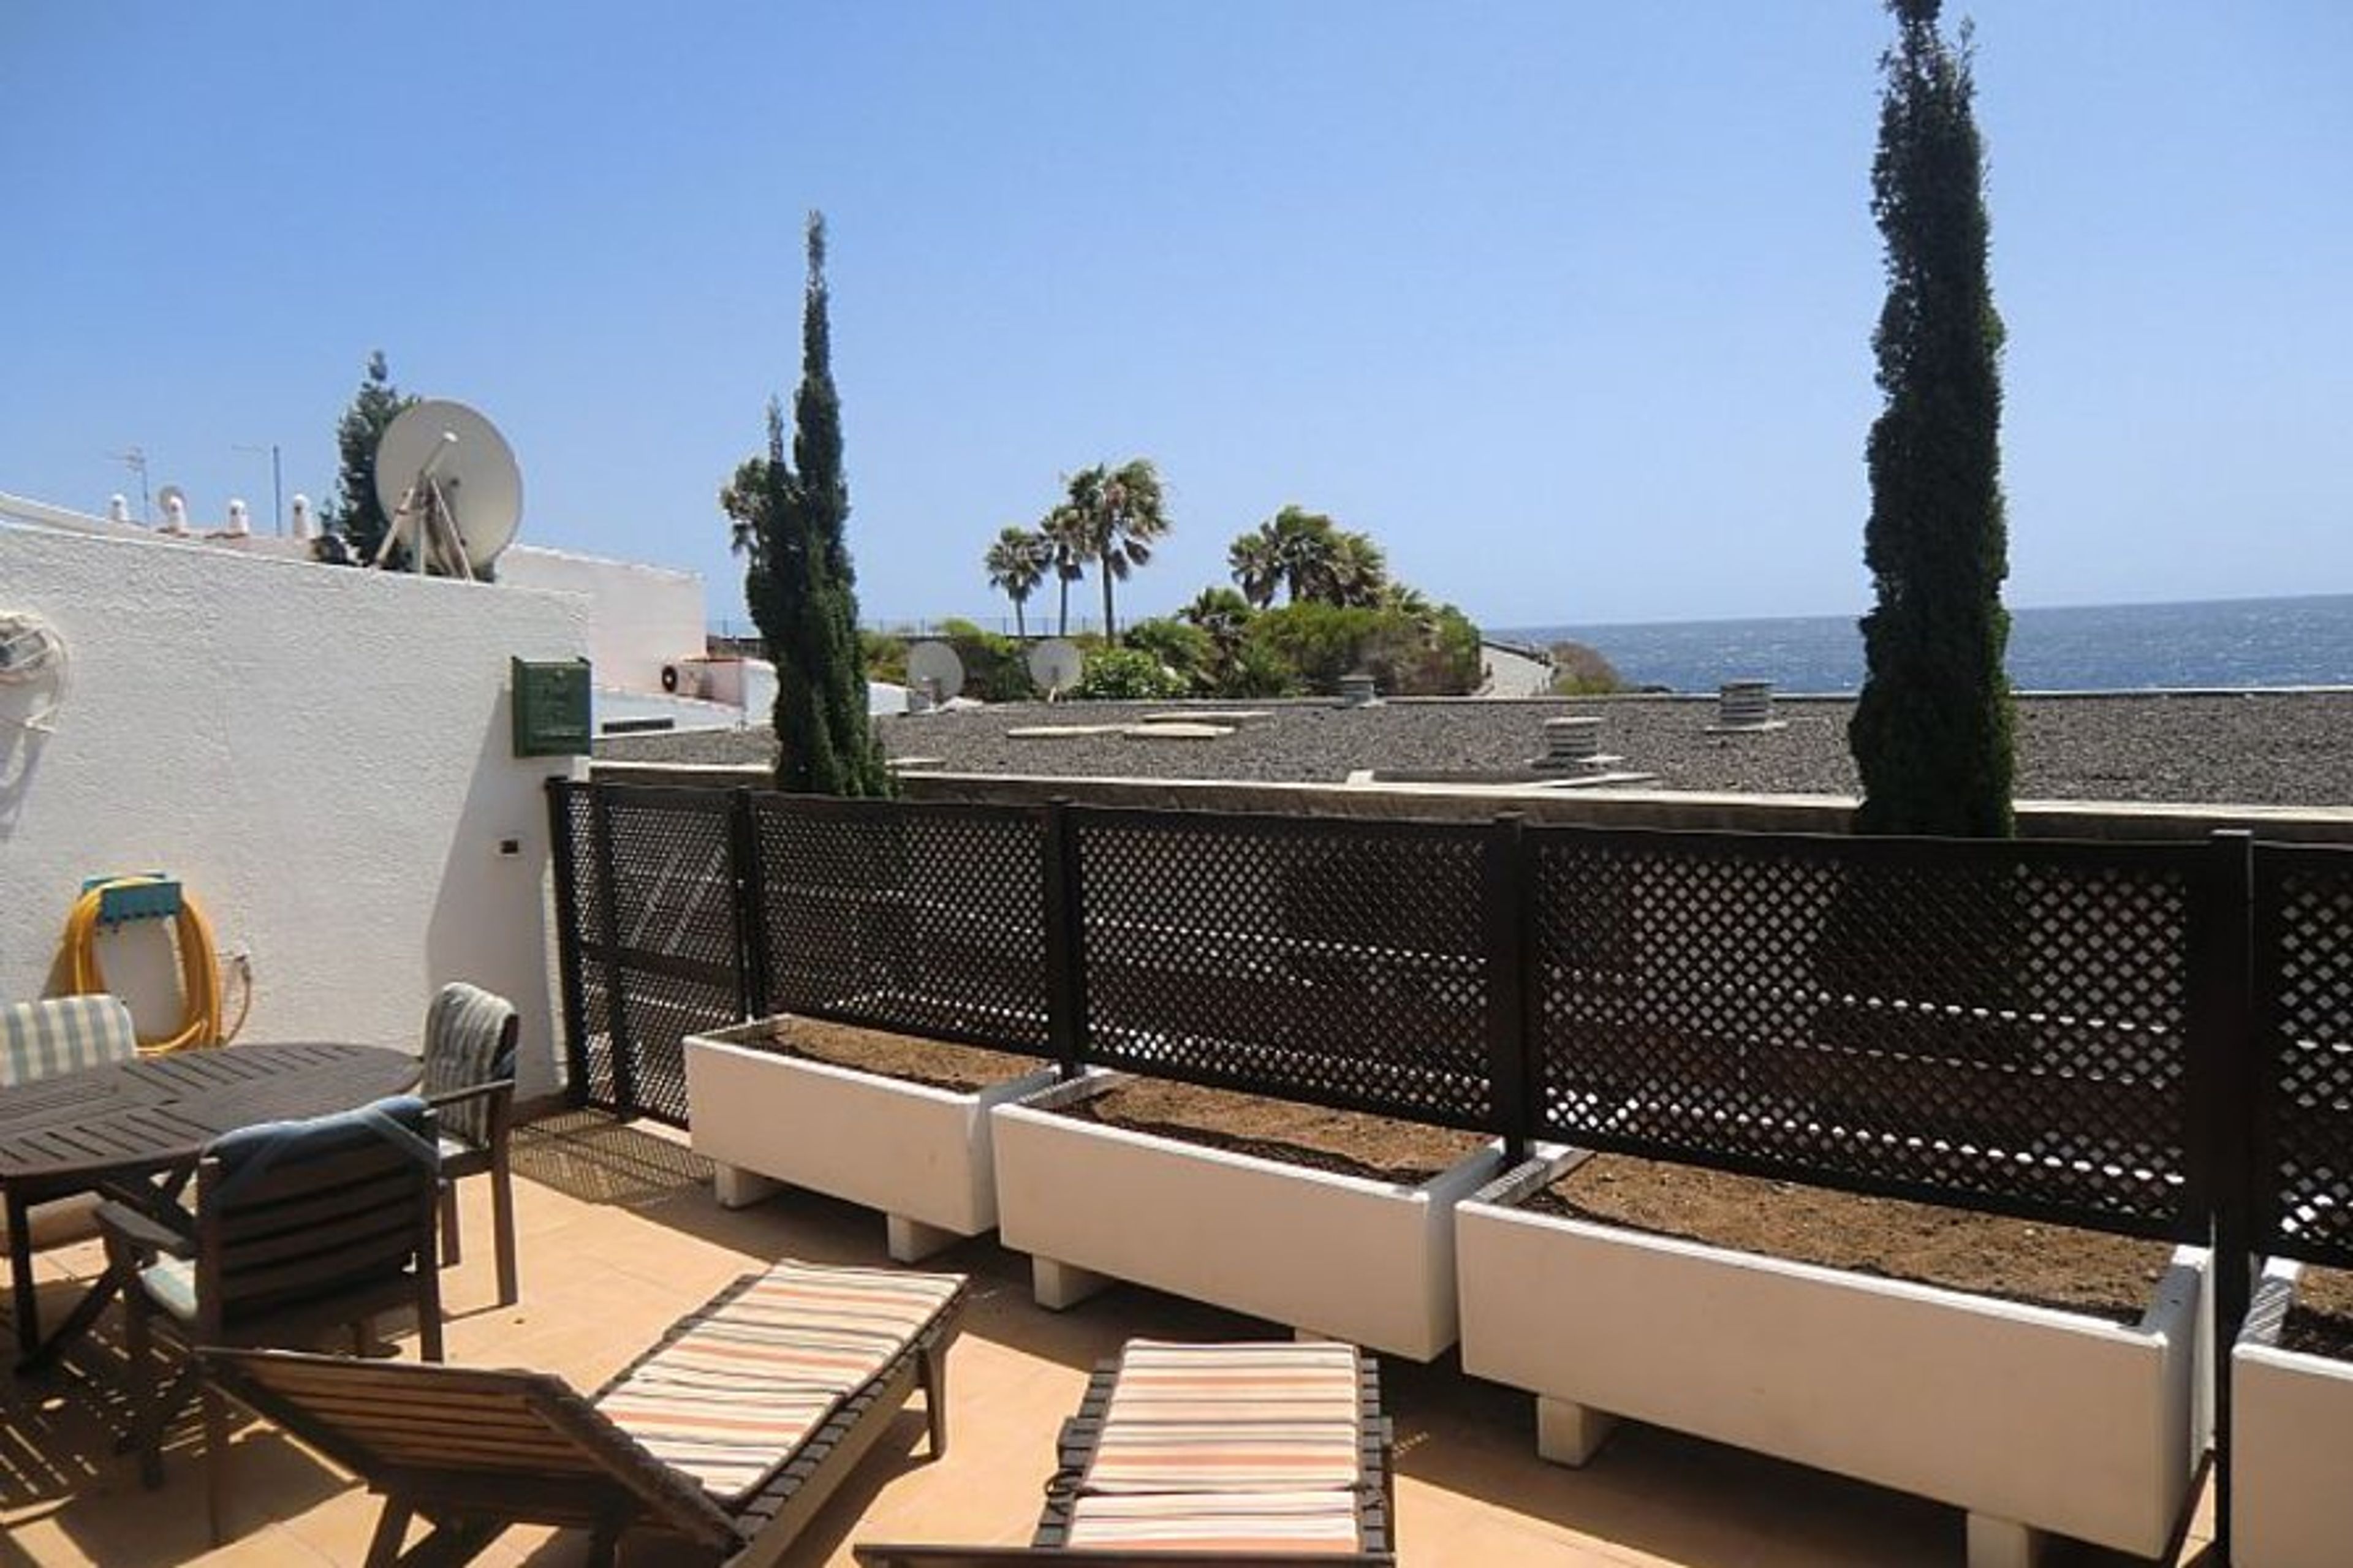 The sunny terrace and sea views